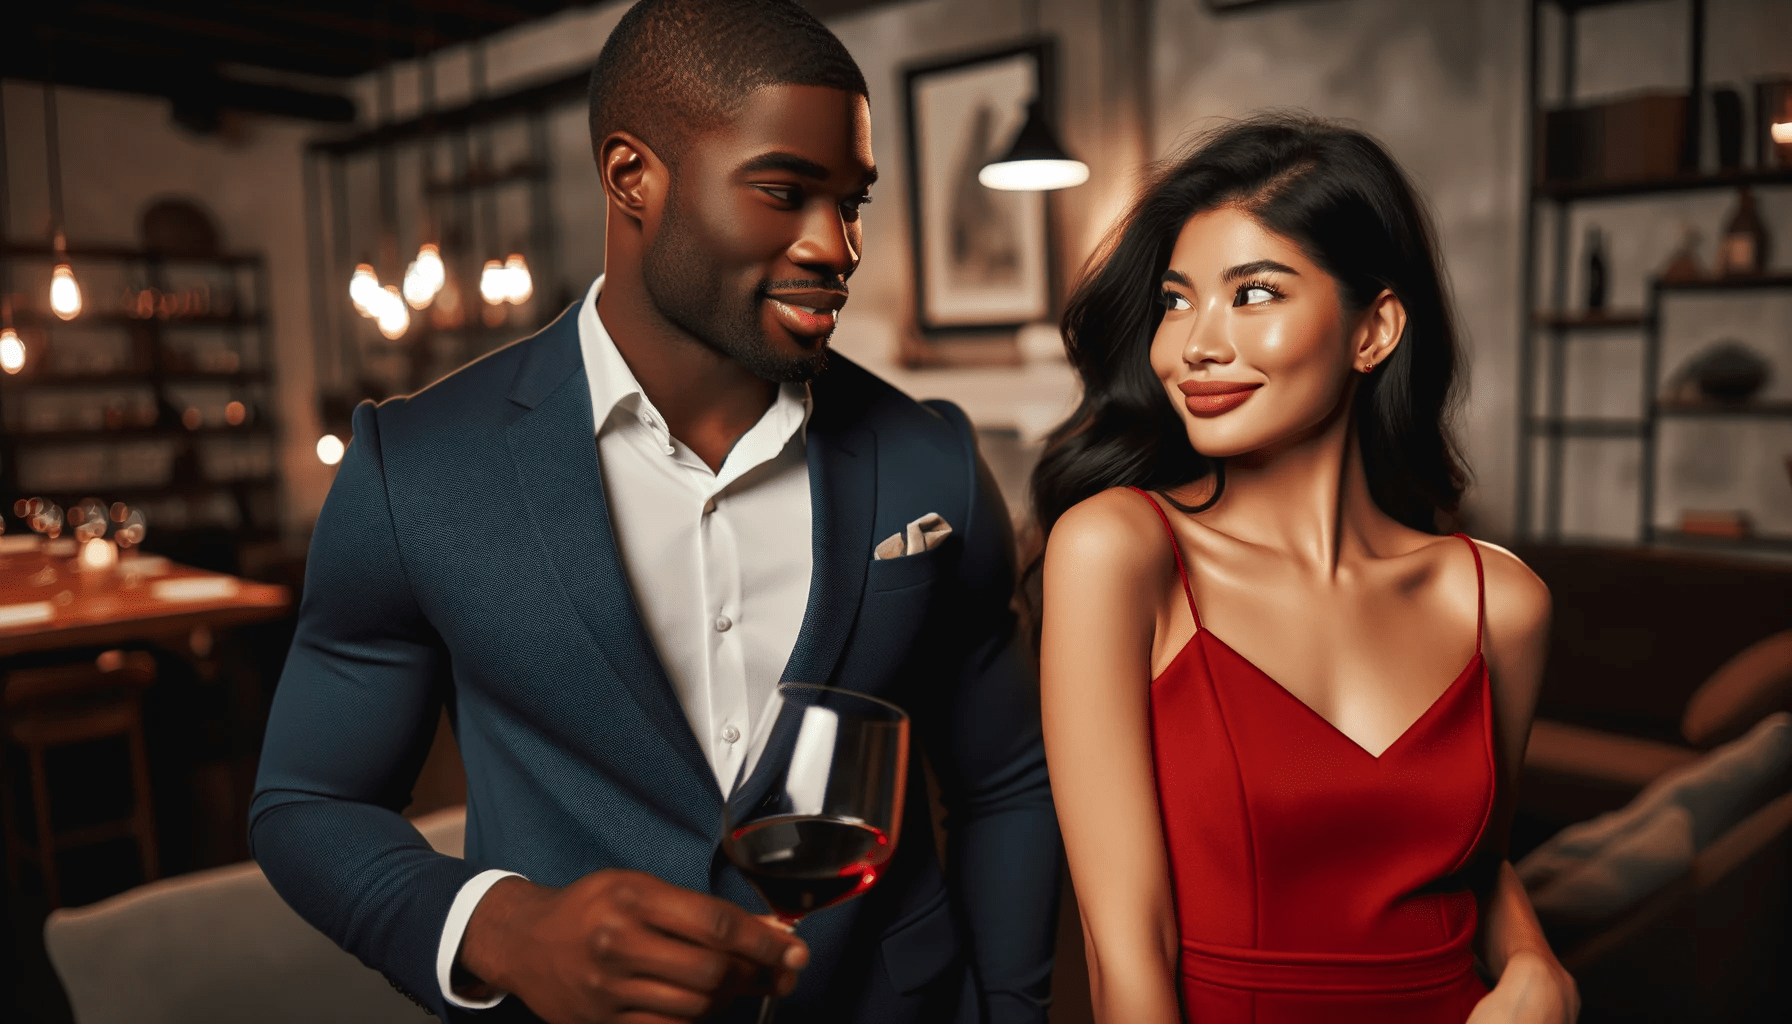 A confident Black man in his early 30s dressed in a sleek navy suit is trying to engage in a smooth conversation with a Hispanic woman in her late 2